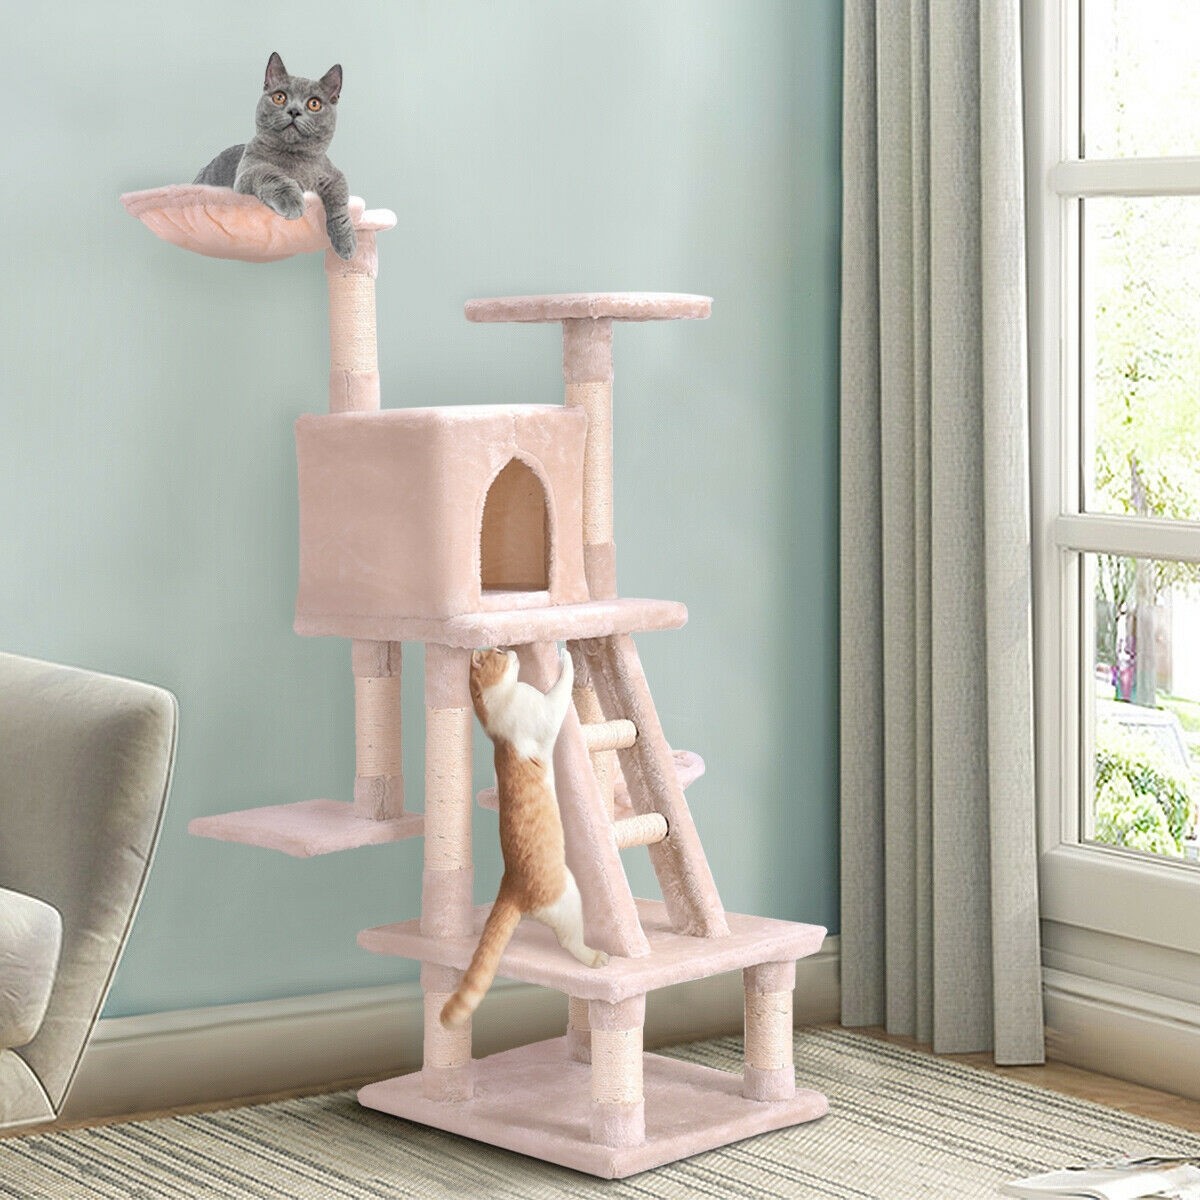 46 In. Condo Scratching Posts Ladder Cat Play Tree - Beige